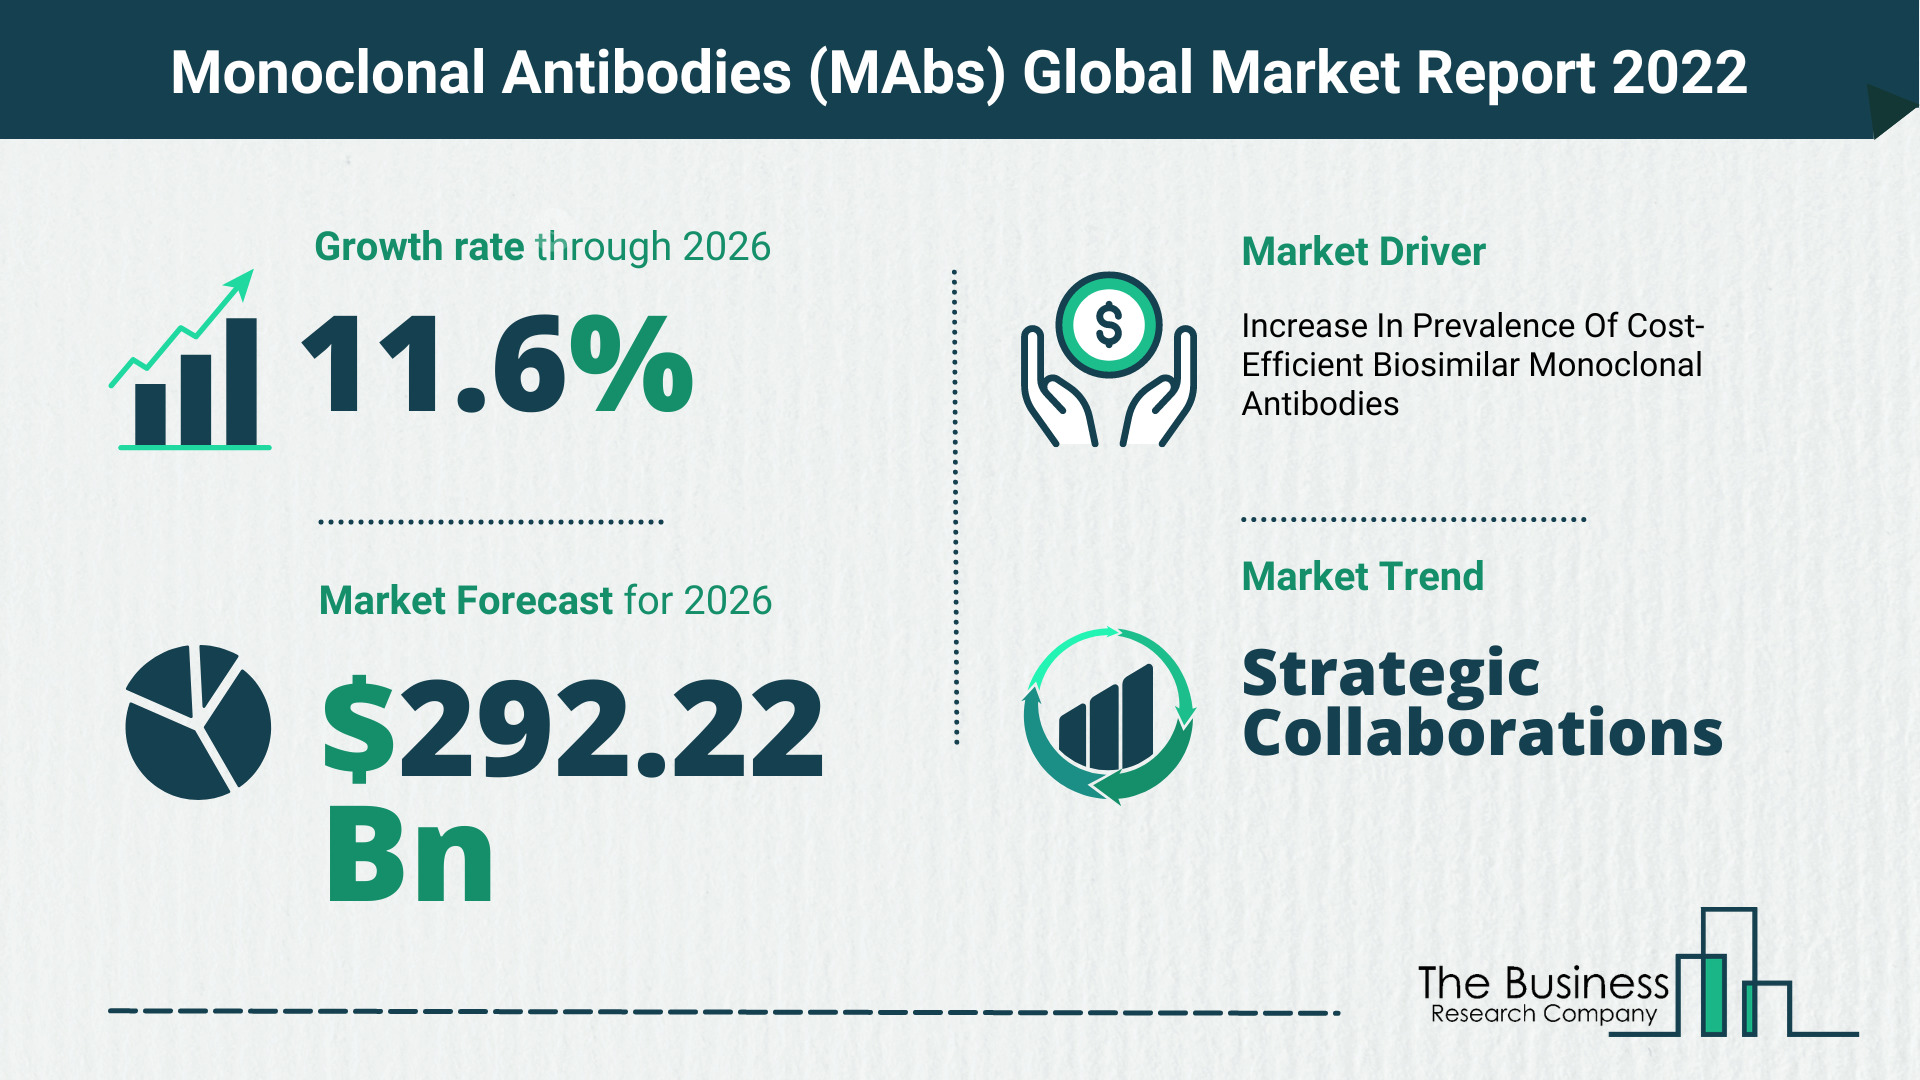 How Will The Monoclonal Antibodies (MAbs) Market Grow In 2022?